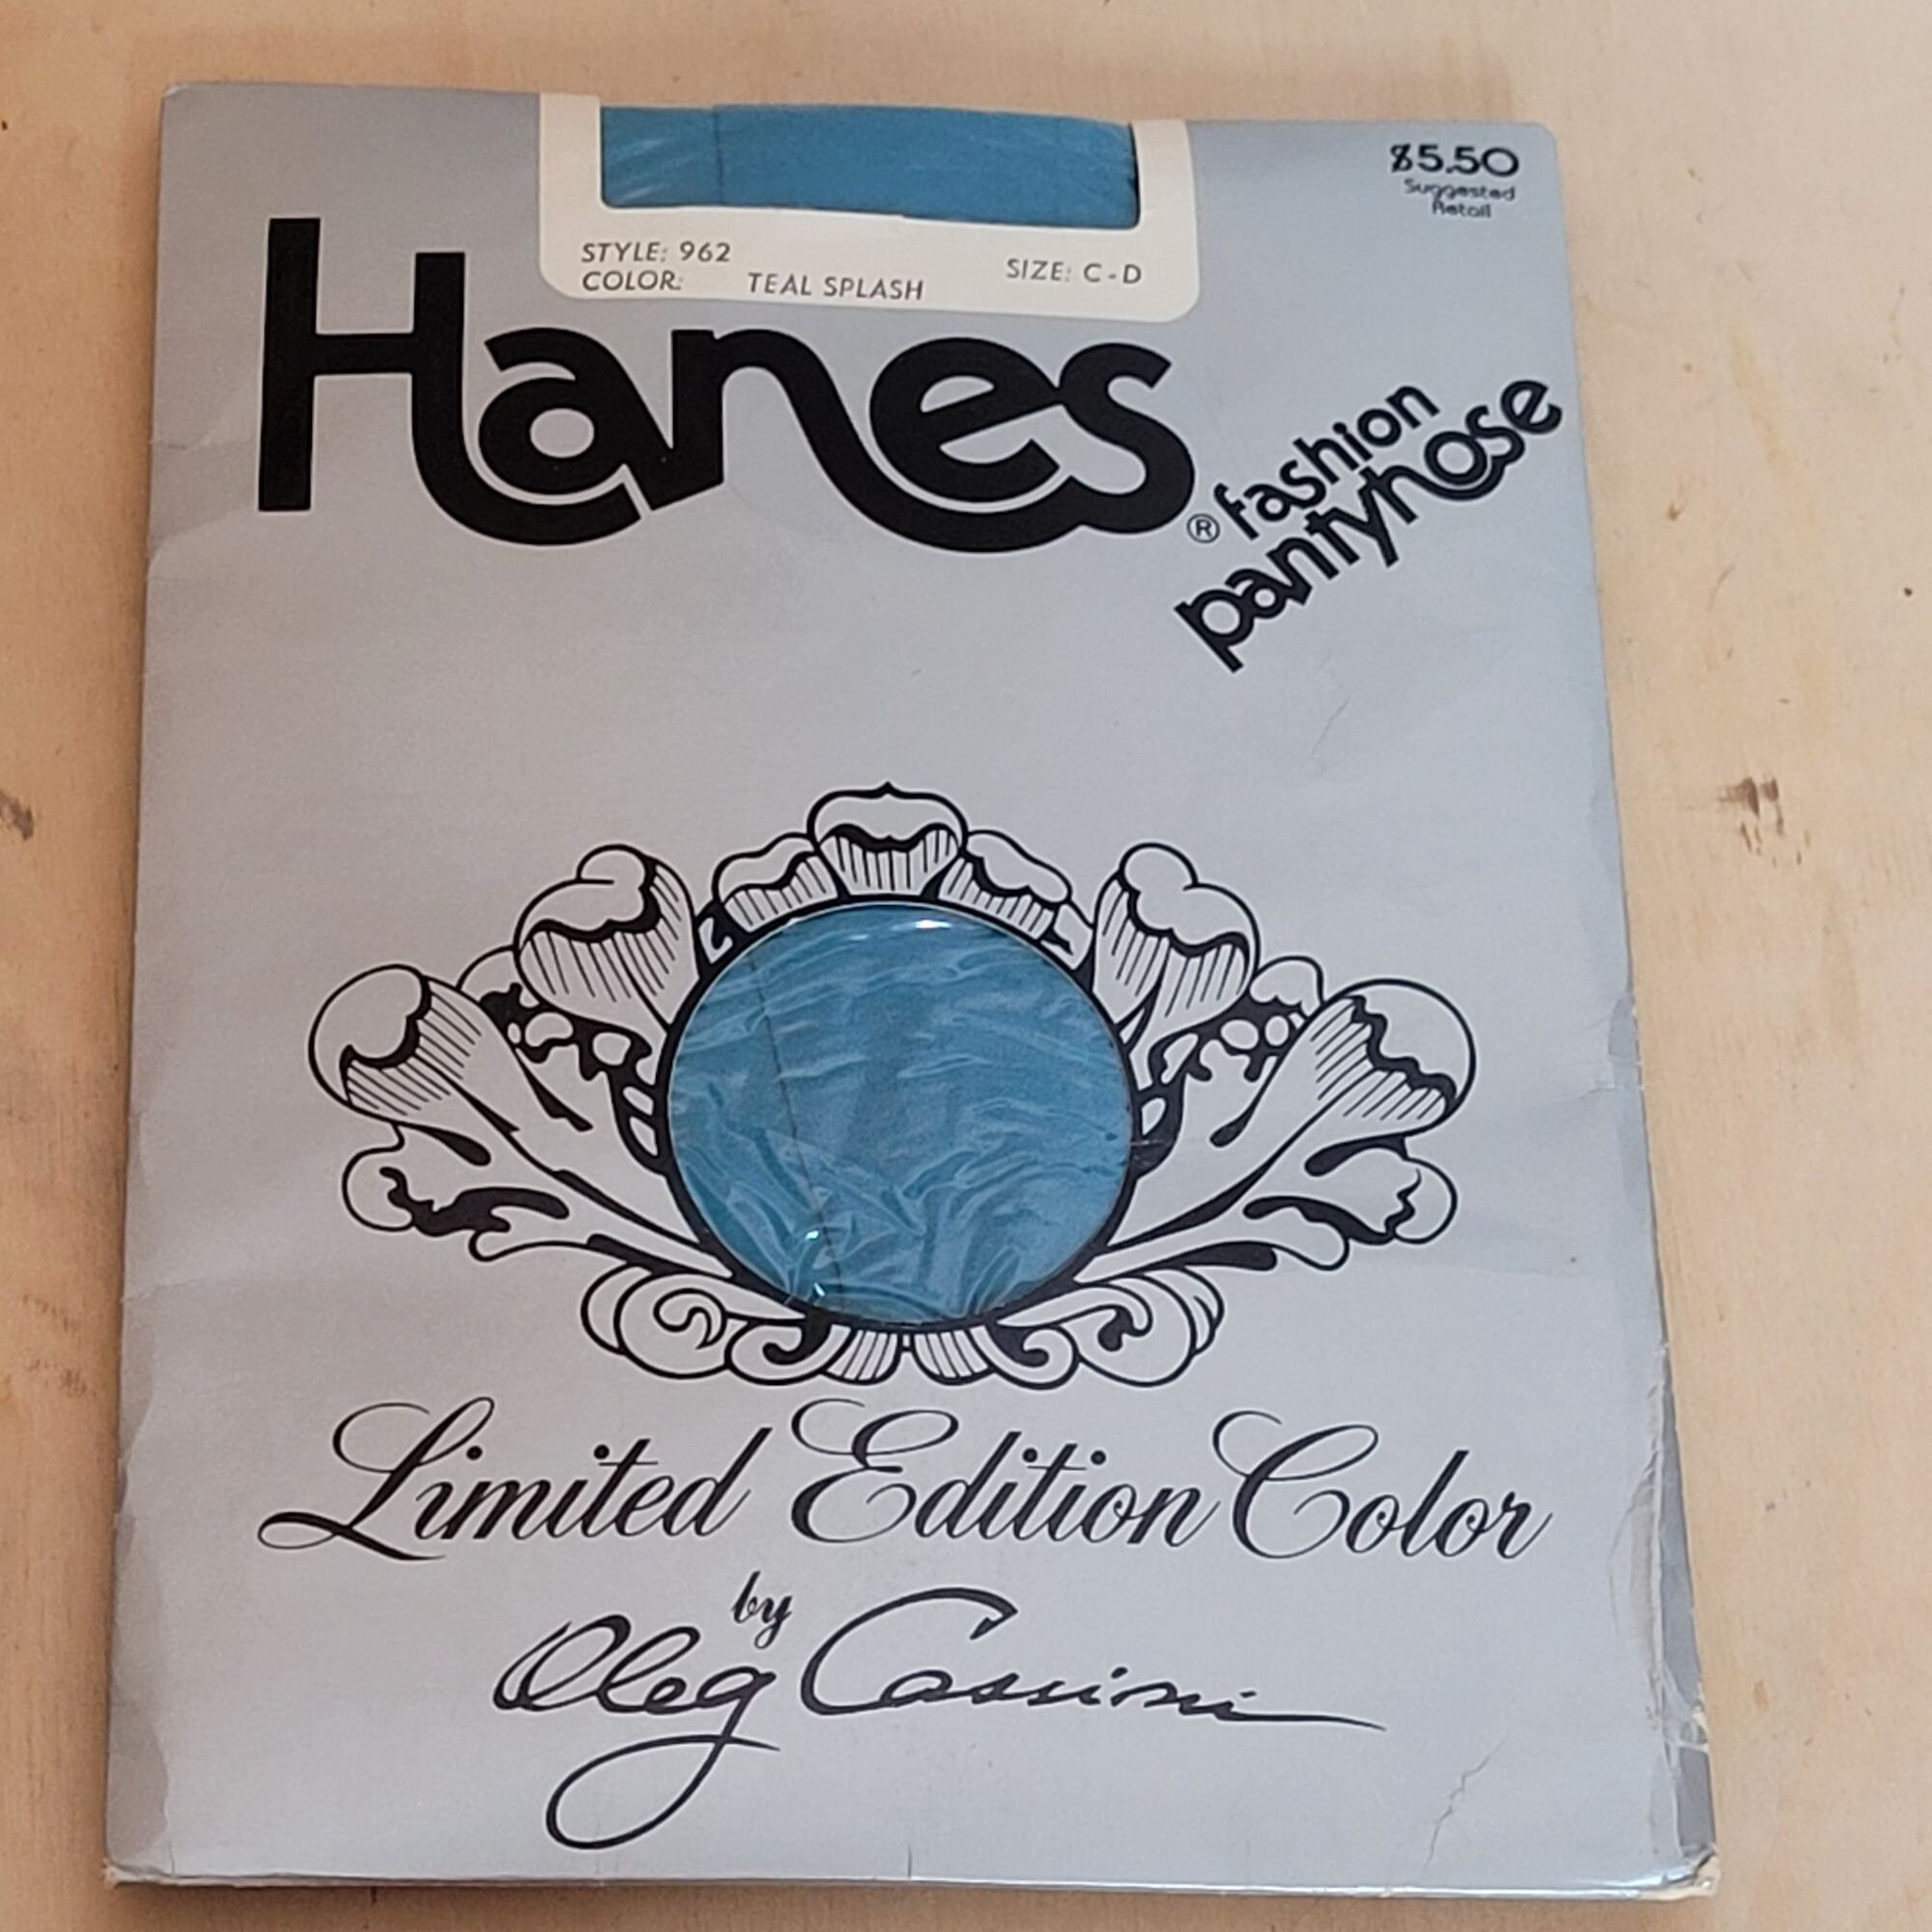 Vintage Hanes Her Way Full Brief Nylon Panty With Lace Waist Band  Candleglow Ivory Sz 6 medium 